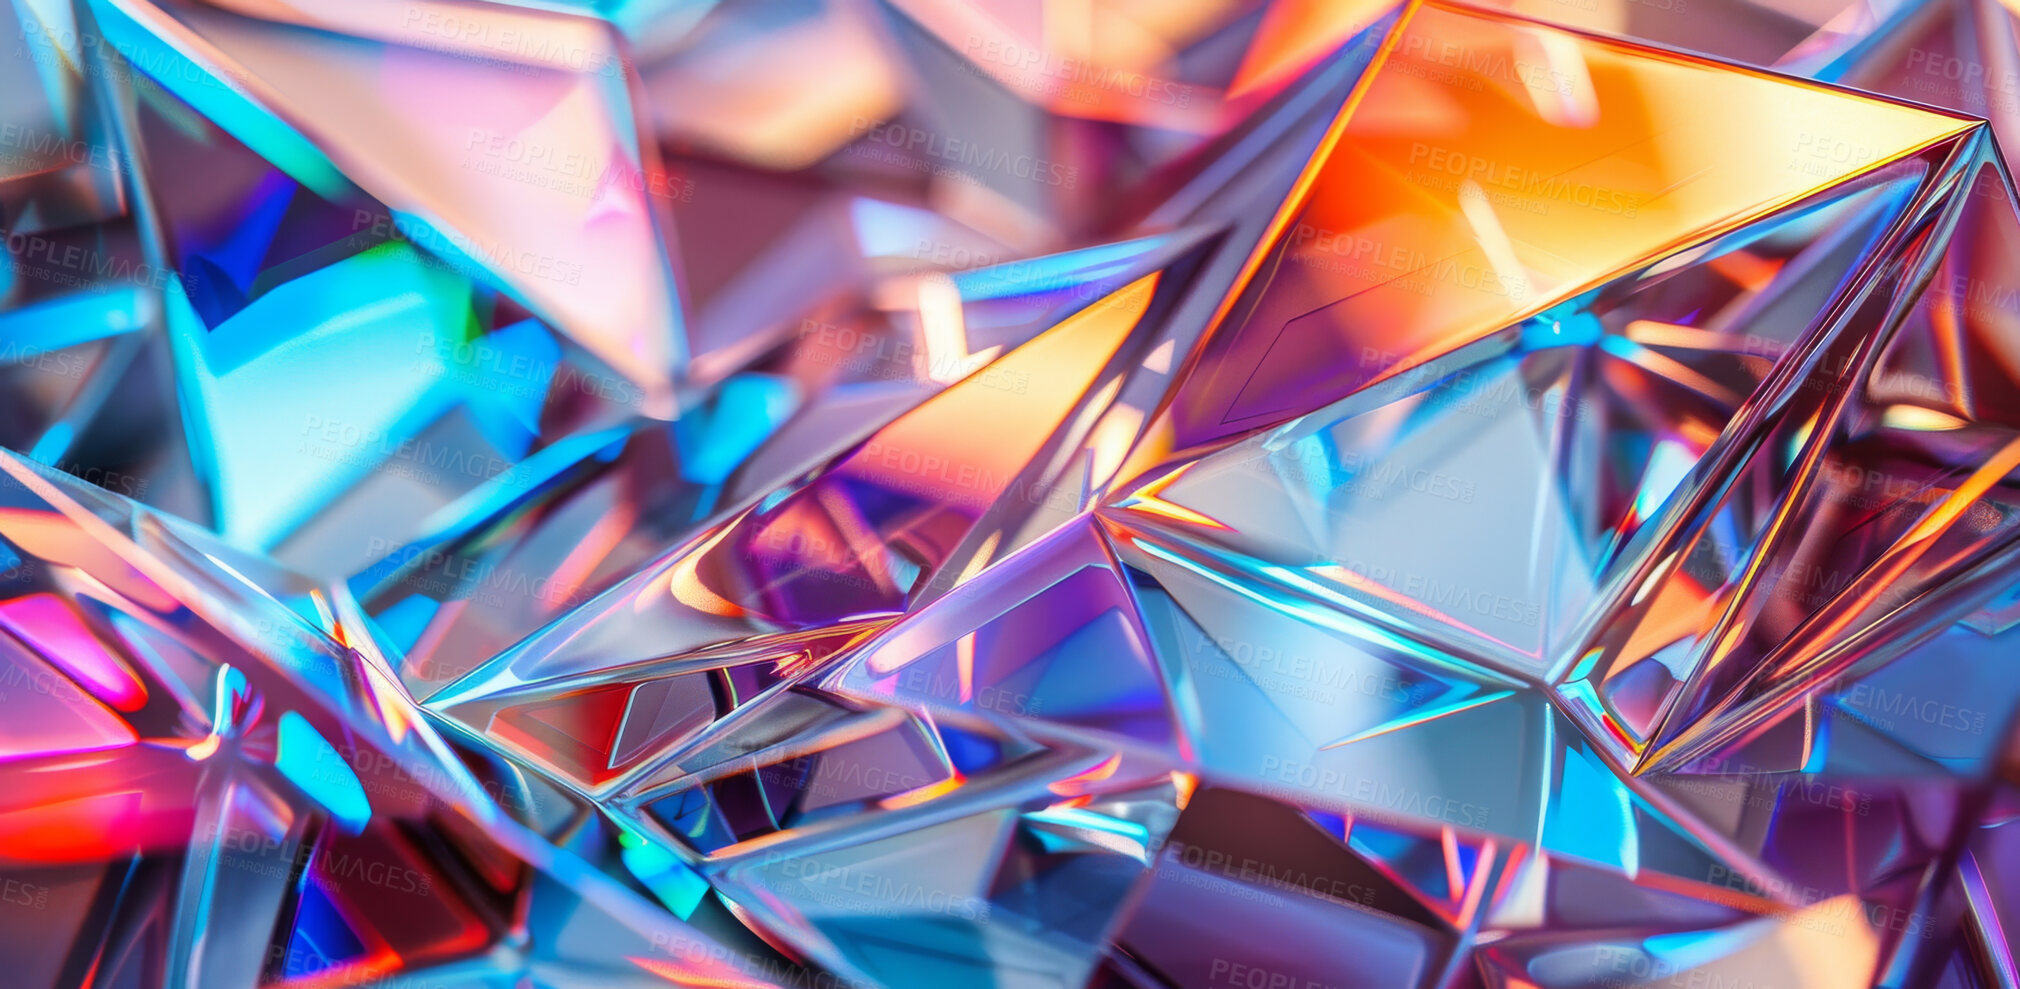 Buy stock photo Rainbow, crystal and holographic as wallpaper design as abstract artwork as reflection, broken glass or background. Prism, light and color pattern or vibrant textures as banner, sparkle or shimmer